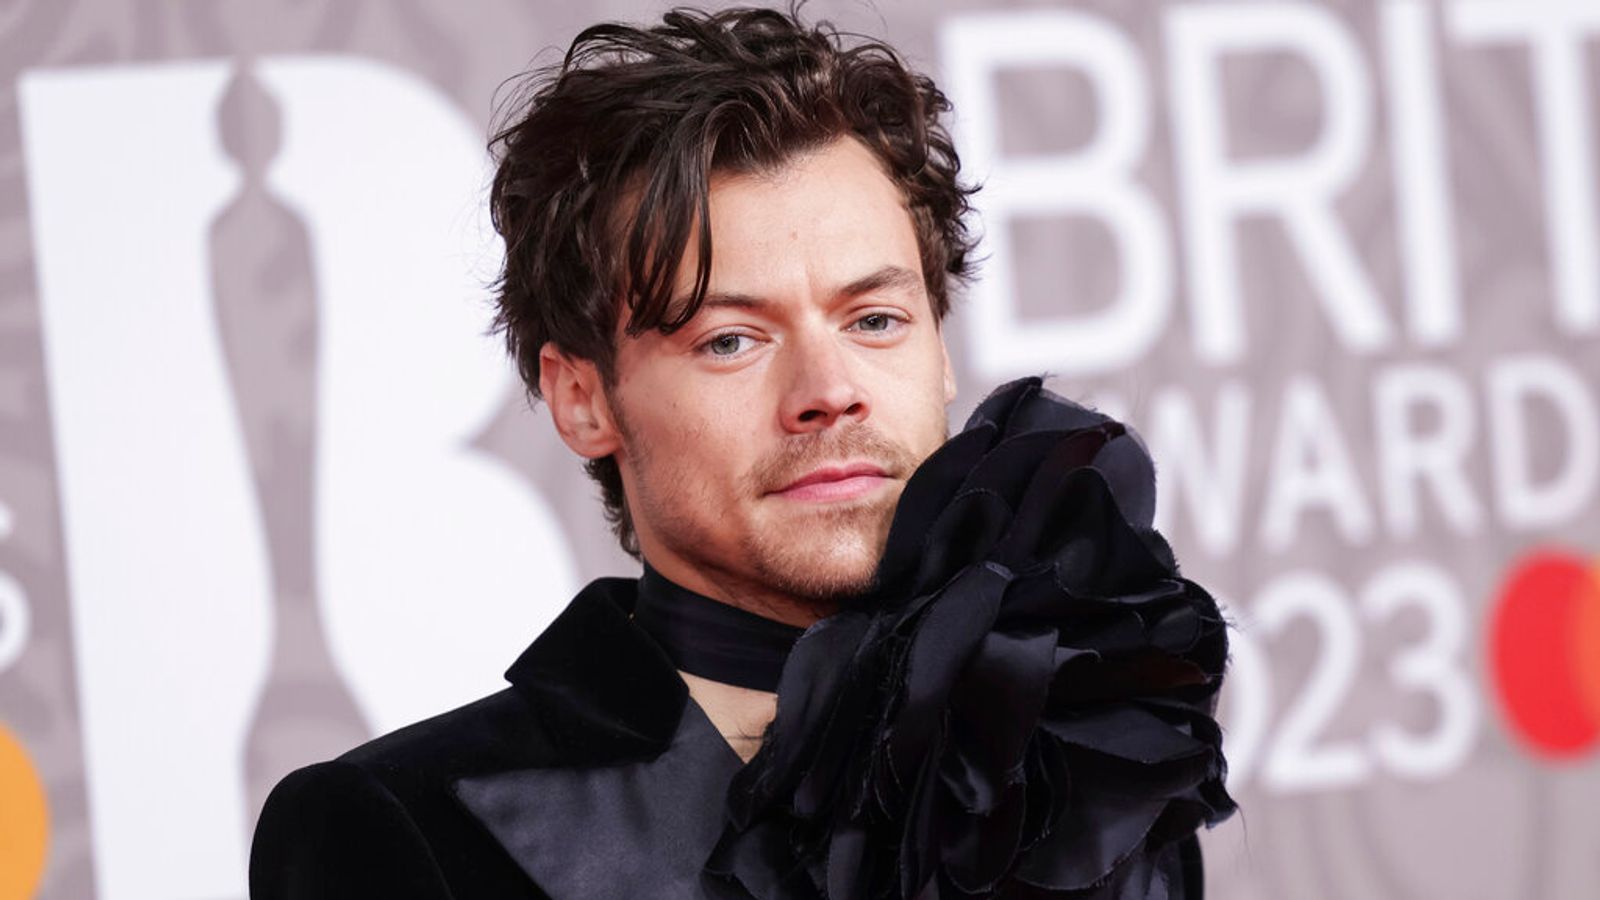 Harry Styles surprises fans with new haircut, Ents & Arts News